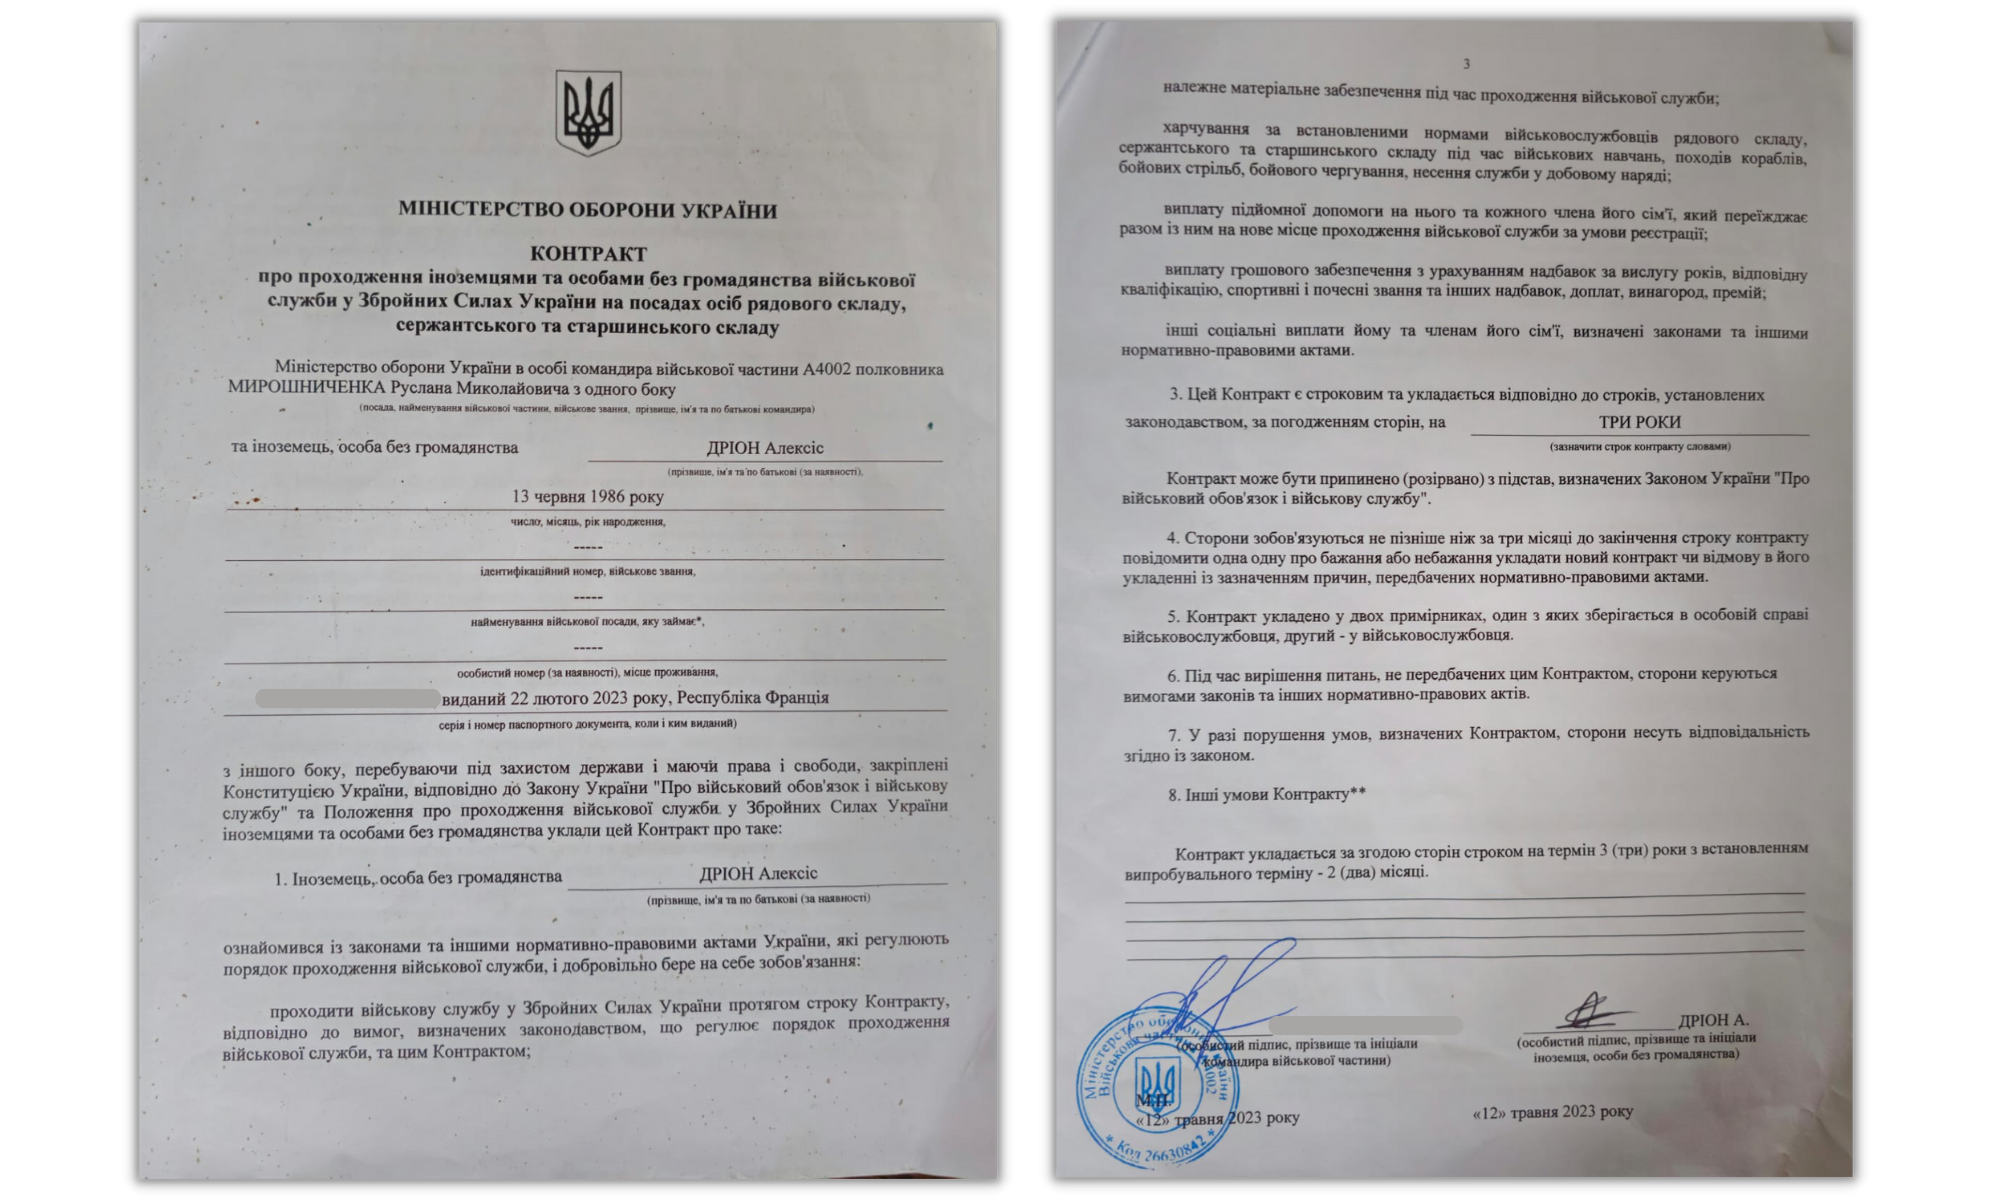 Engagement contract in the Ukrainian International Legion signed by Alexis Drion.